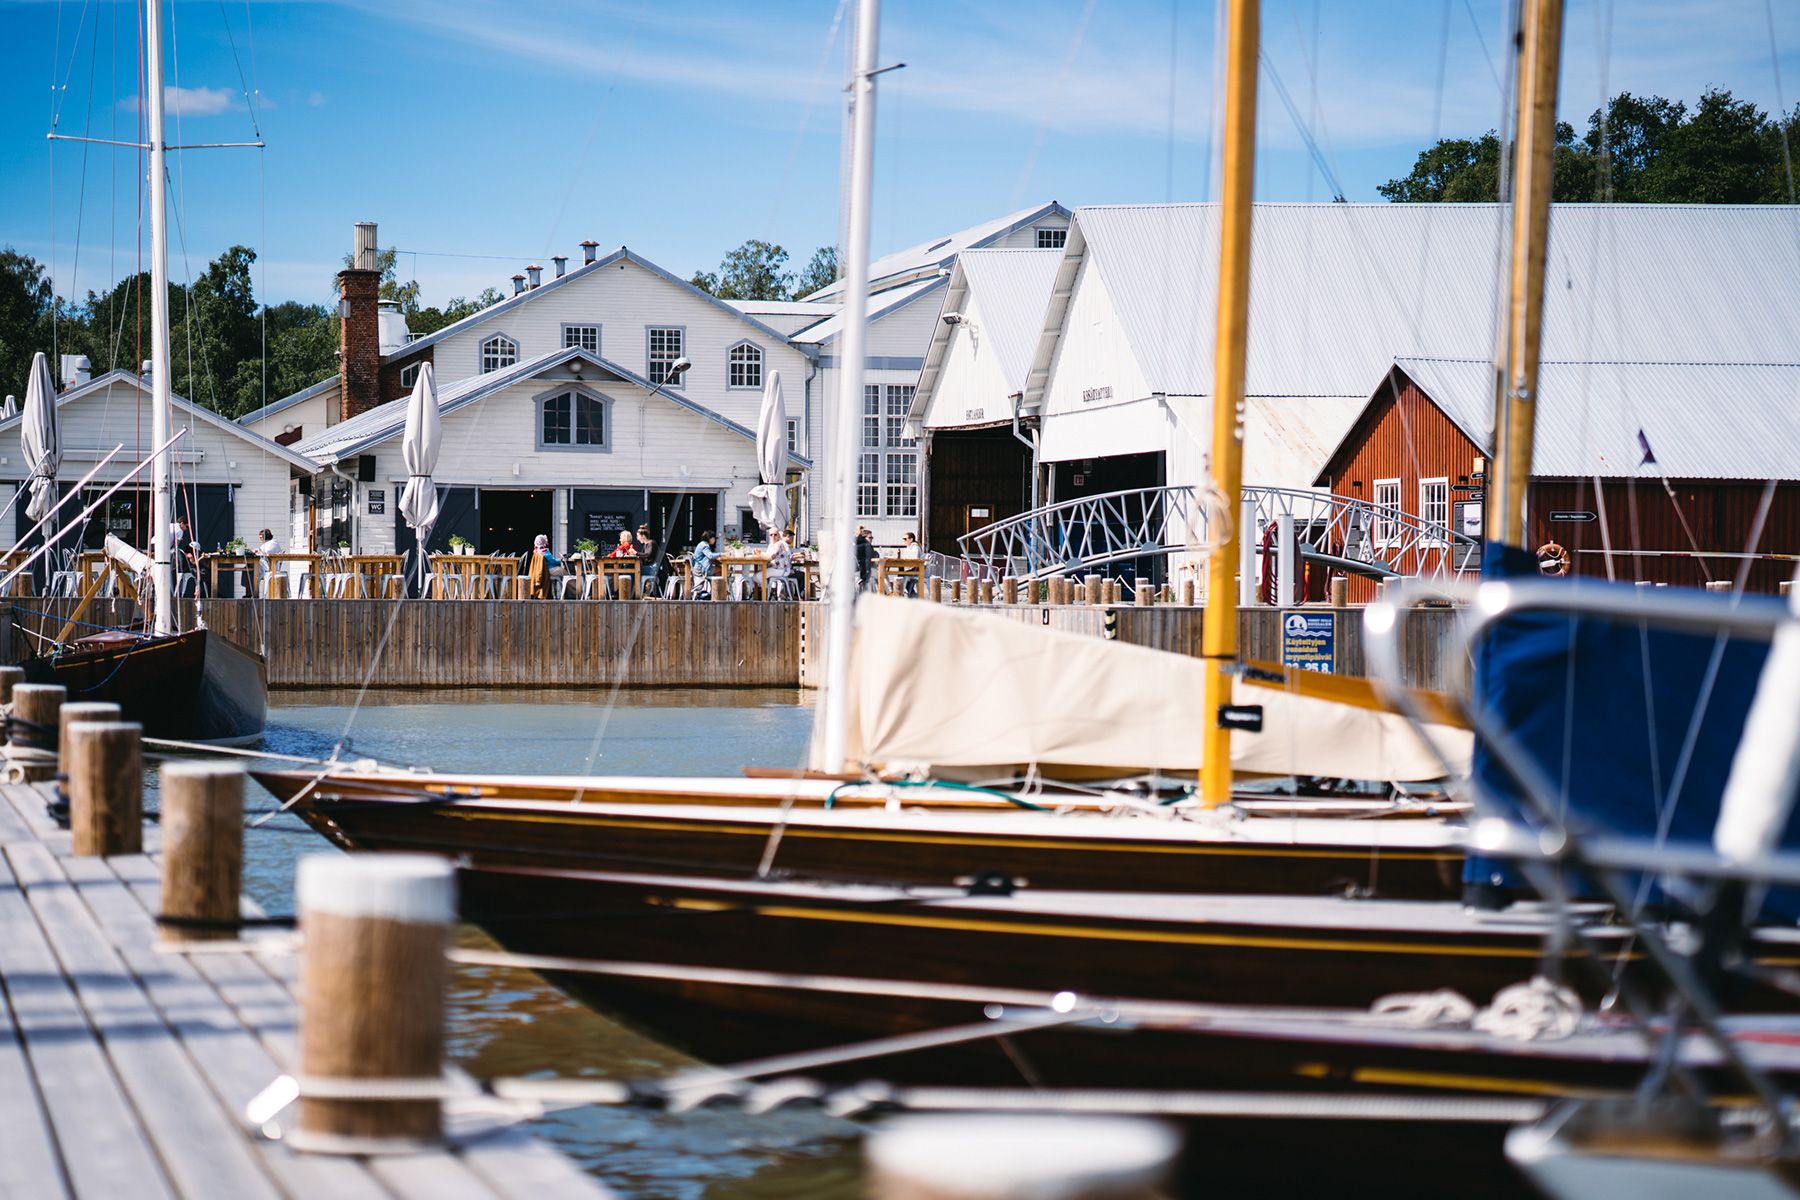 Ruissalo Boatyard on a summer's day with boats docked in the harbour and diners enjoying a meal at Zake Pizzeria & Wine Bar.